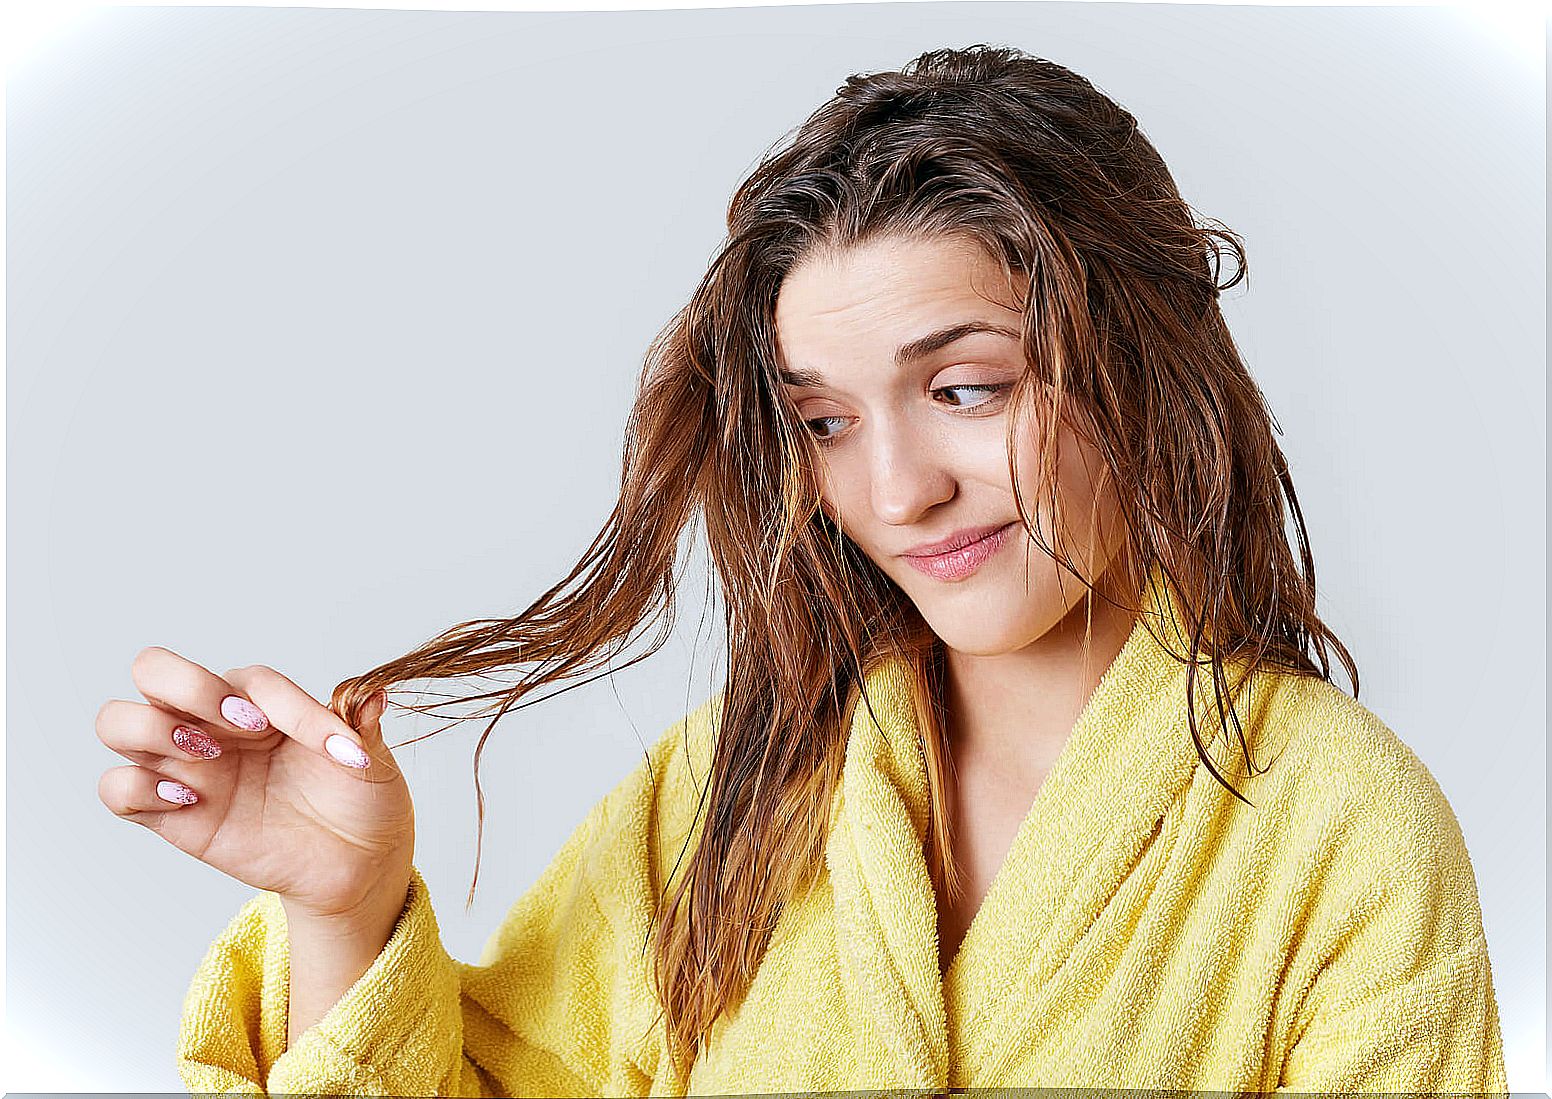 Why should you avoid sleeping with wet hair?